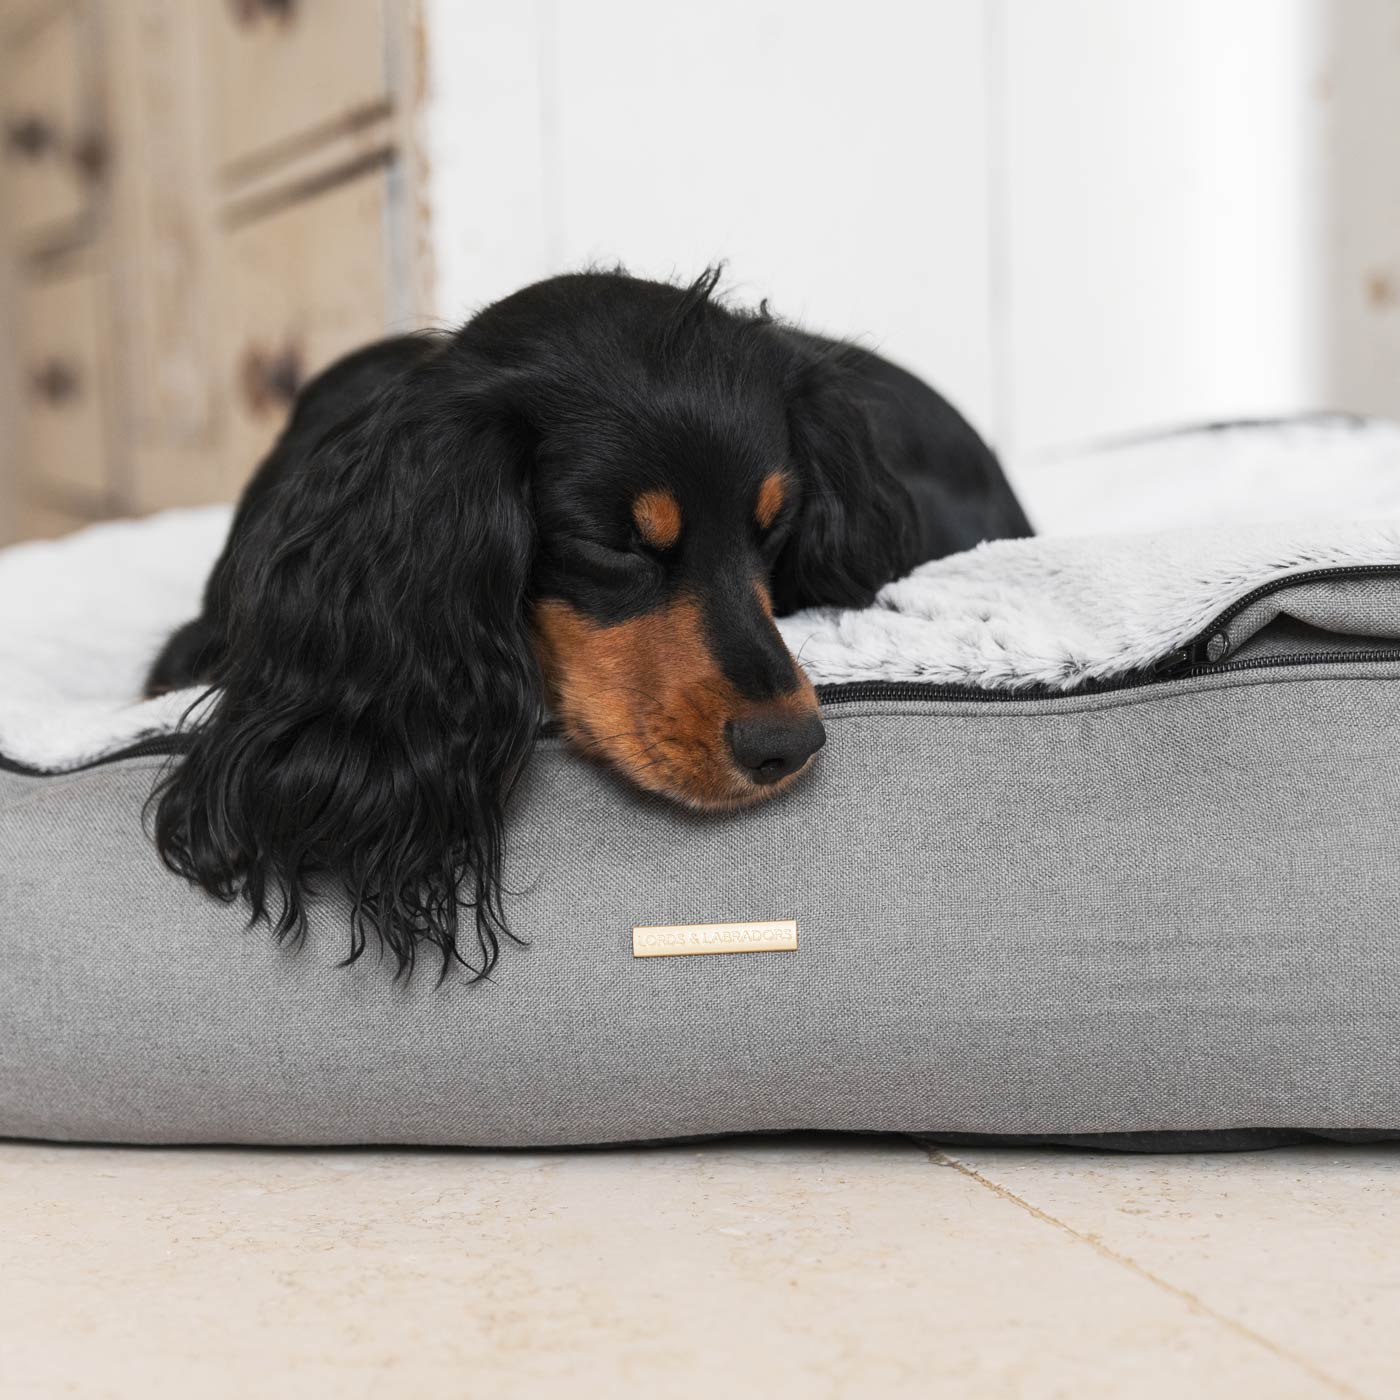 Present Your Furry Friend with the Perfect Dog Bed for The Ultimate Pet Nap-Time! Discover Our Luxury Dig & Dive Dog Bed! Available Now at Lords & Labradors US